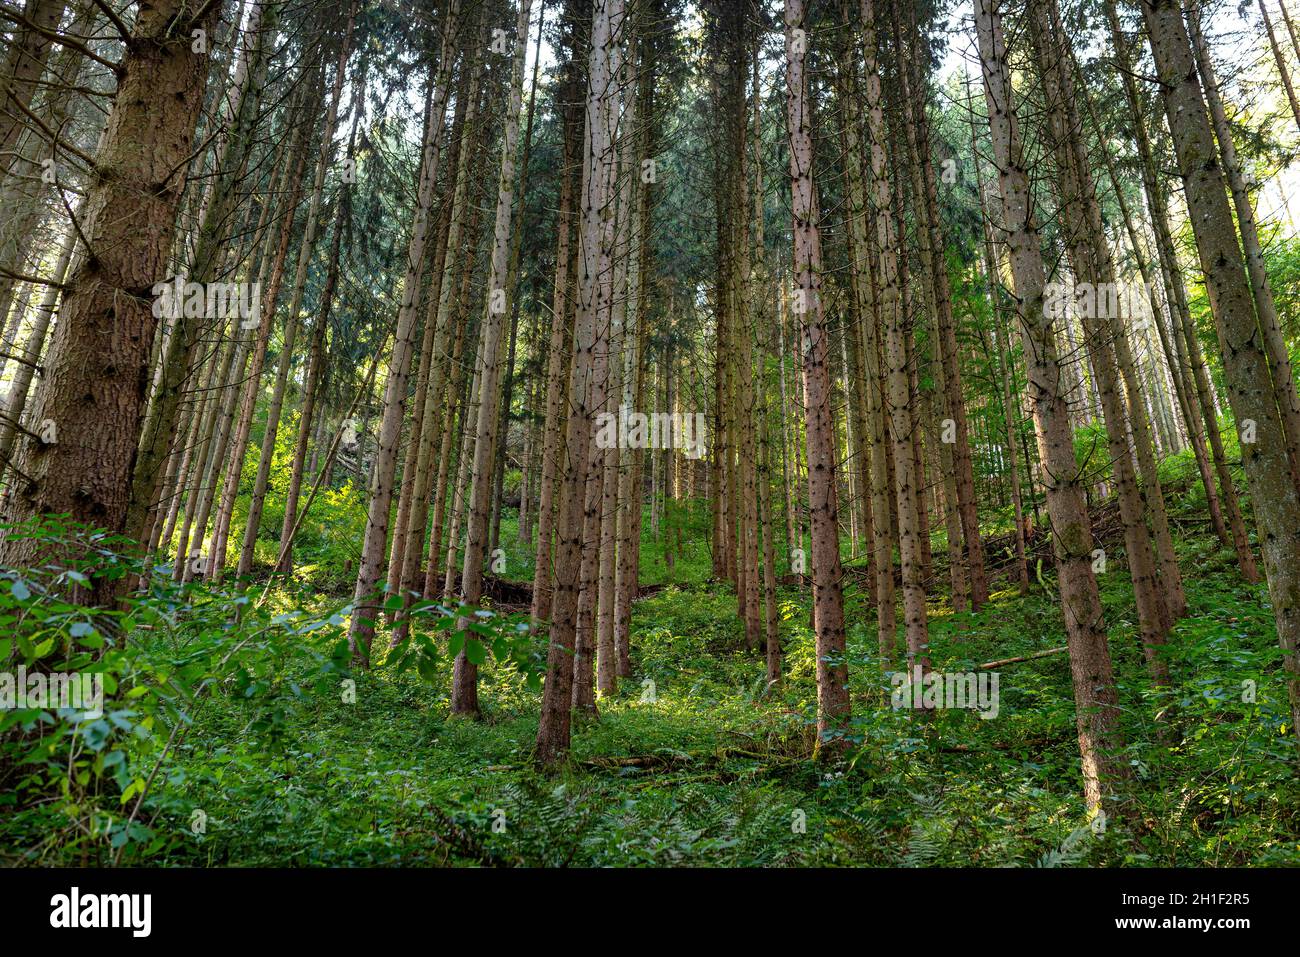 Tall conifers in a dense forest, view upwards of tree trunks, in the autumn season. Stock Photo